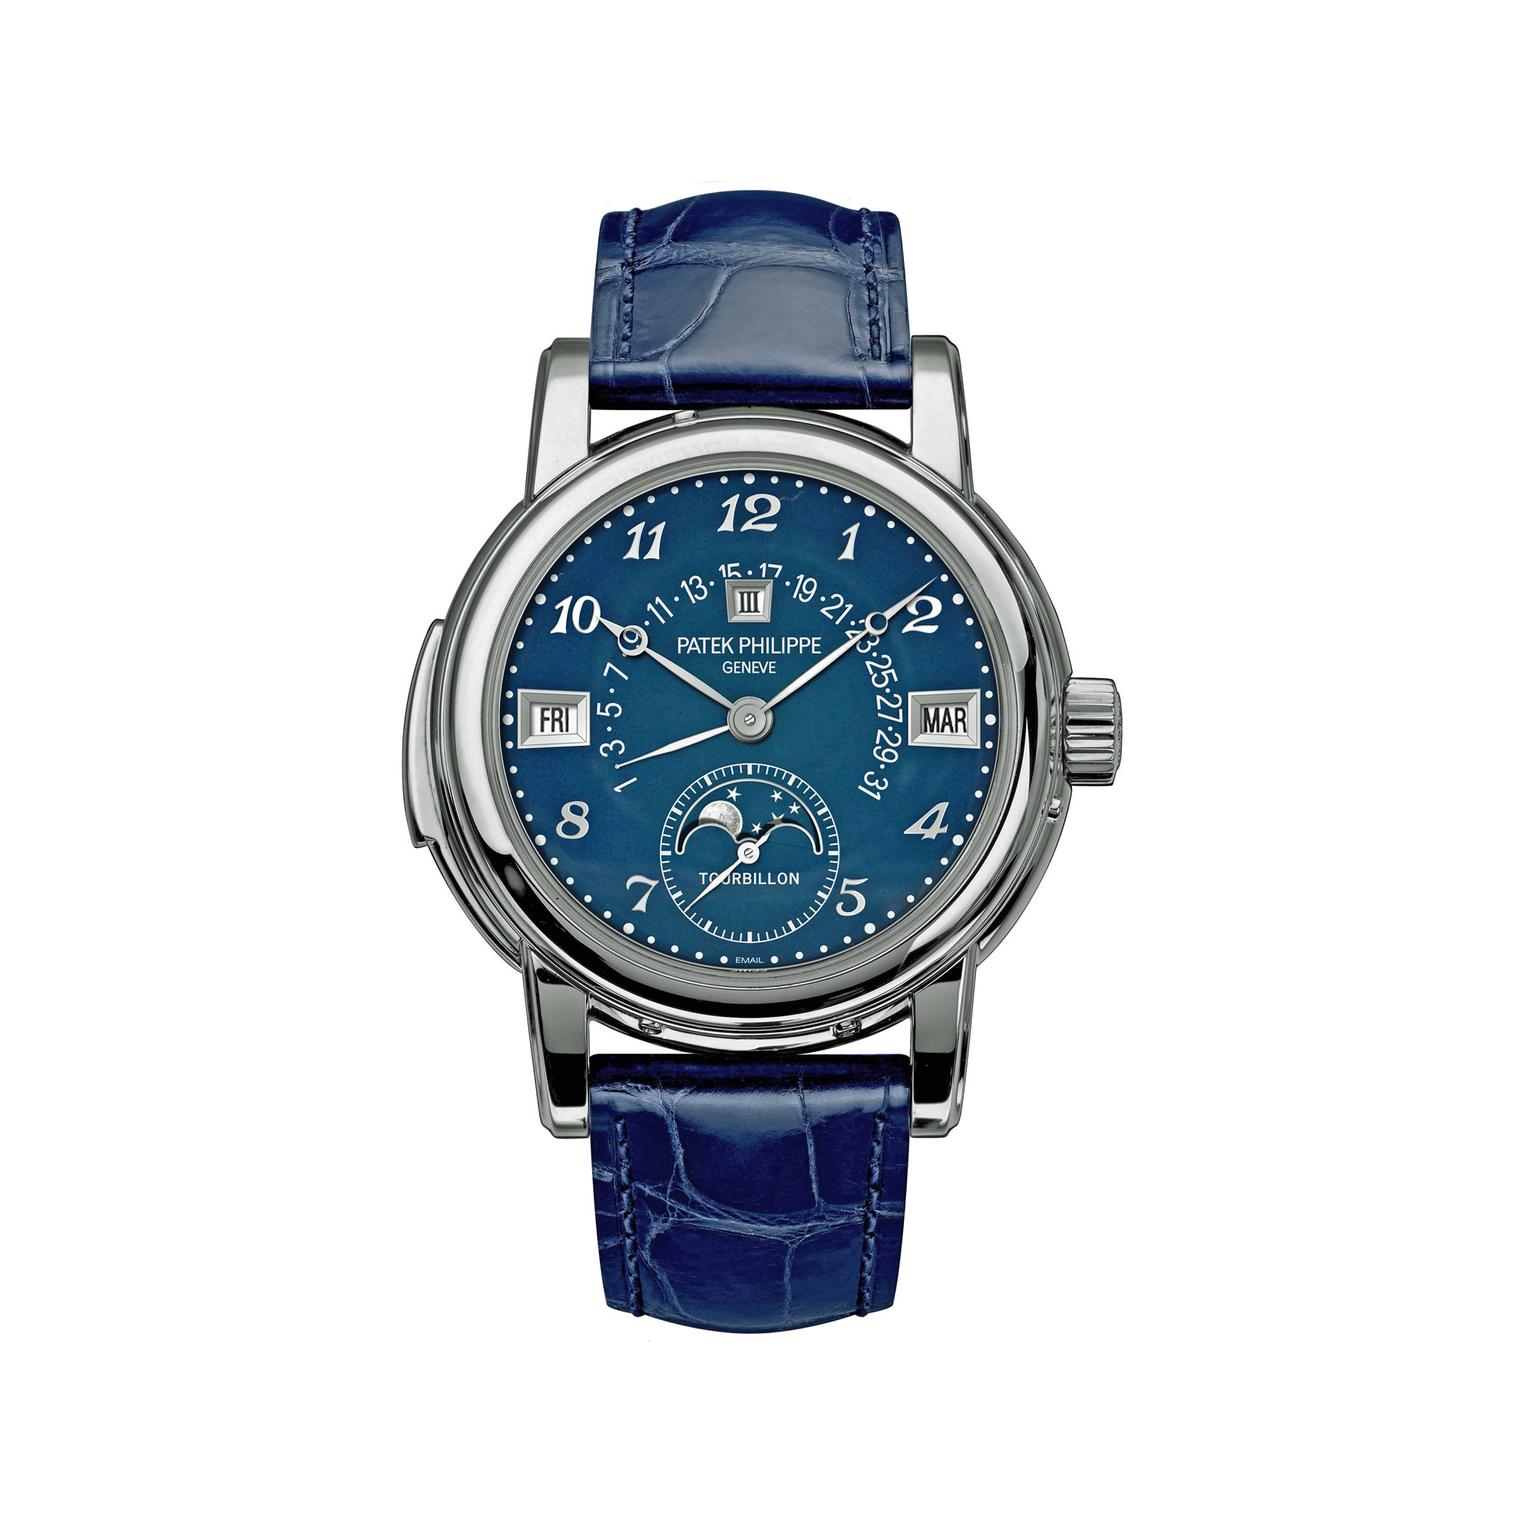 Patek Philippe Reference 5016A-010 watch